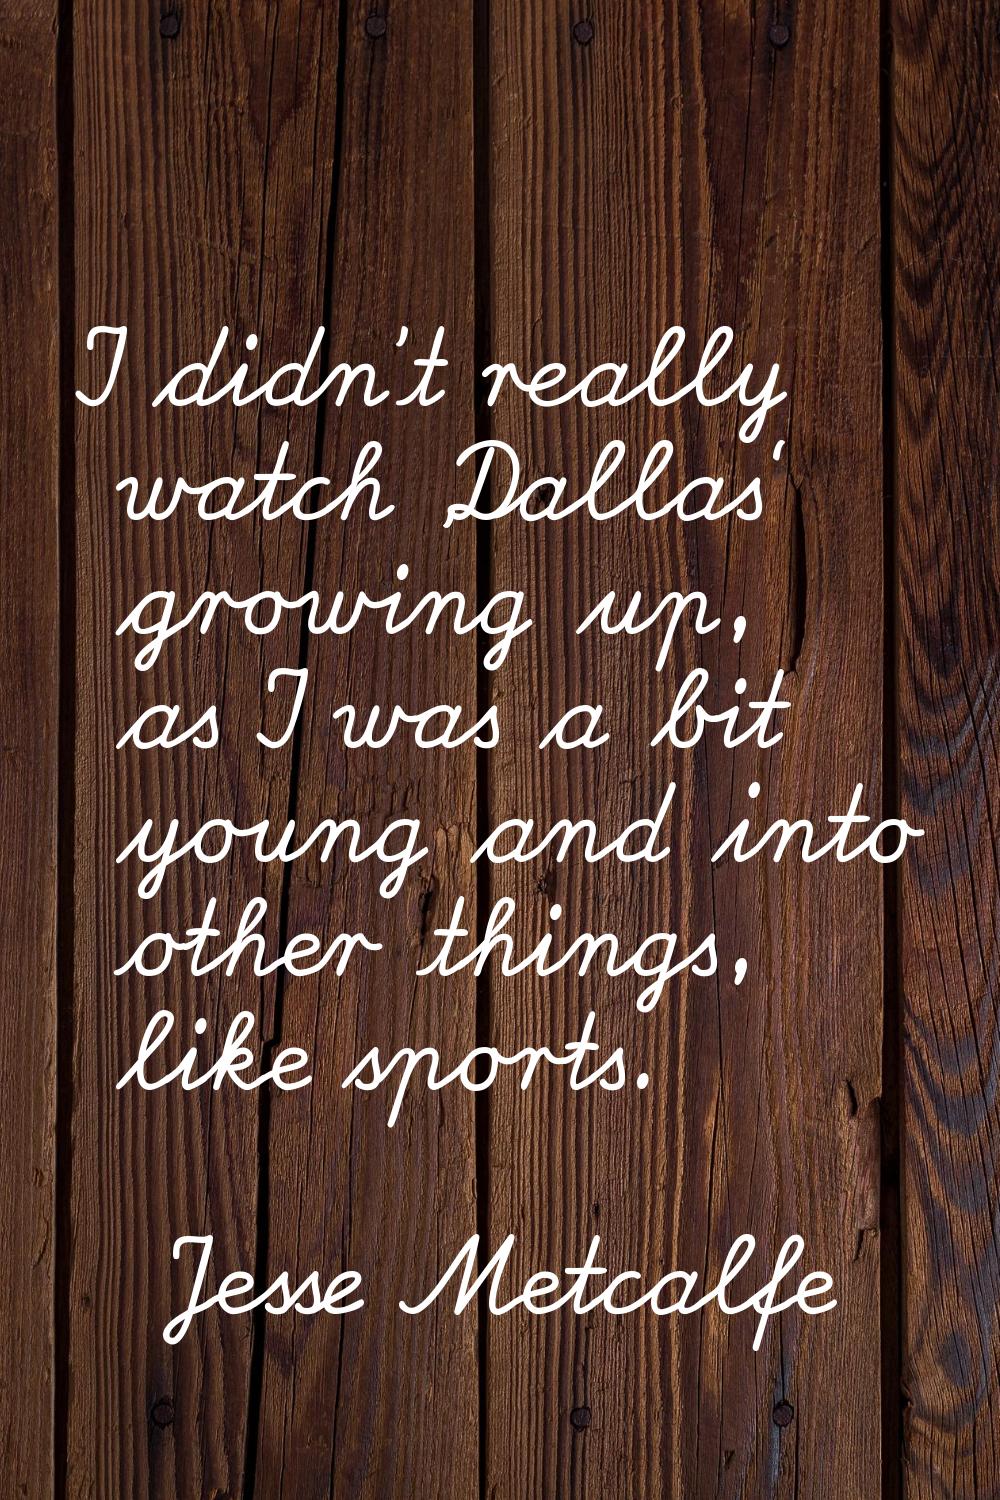 I didn't really watch 'Dallas' growing up, as I was a bit young and into other things, like sports.